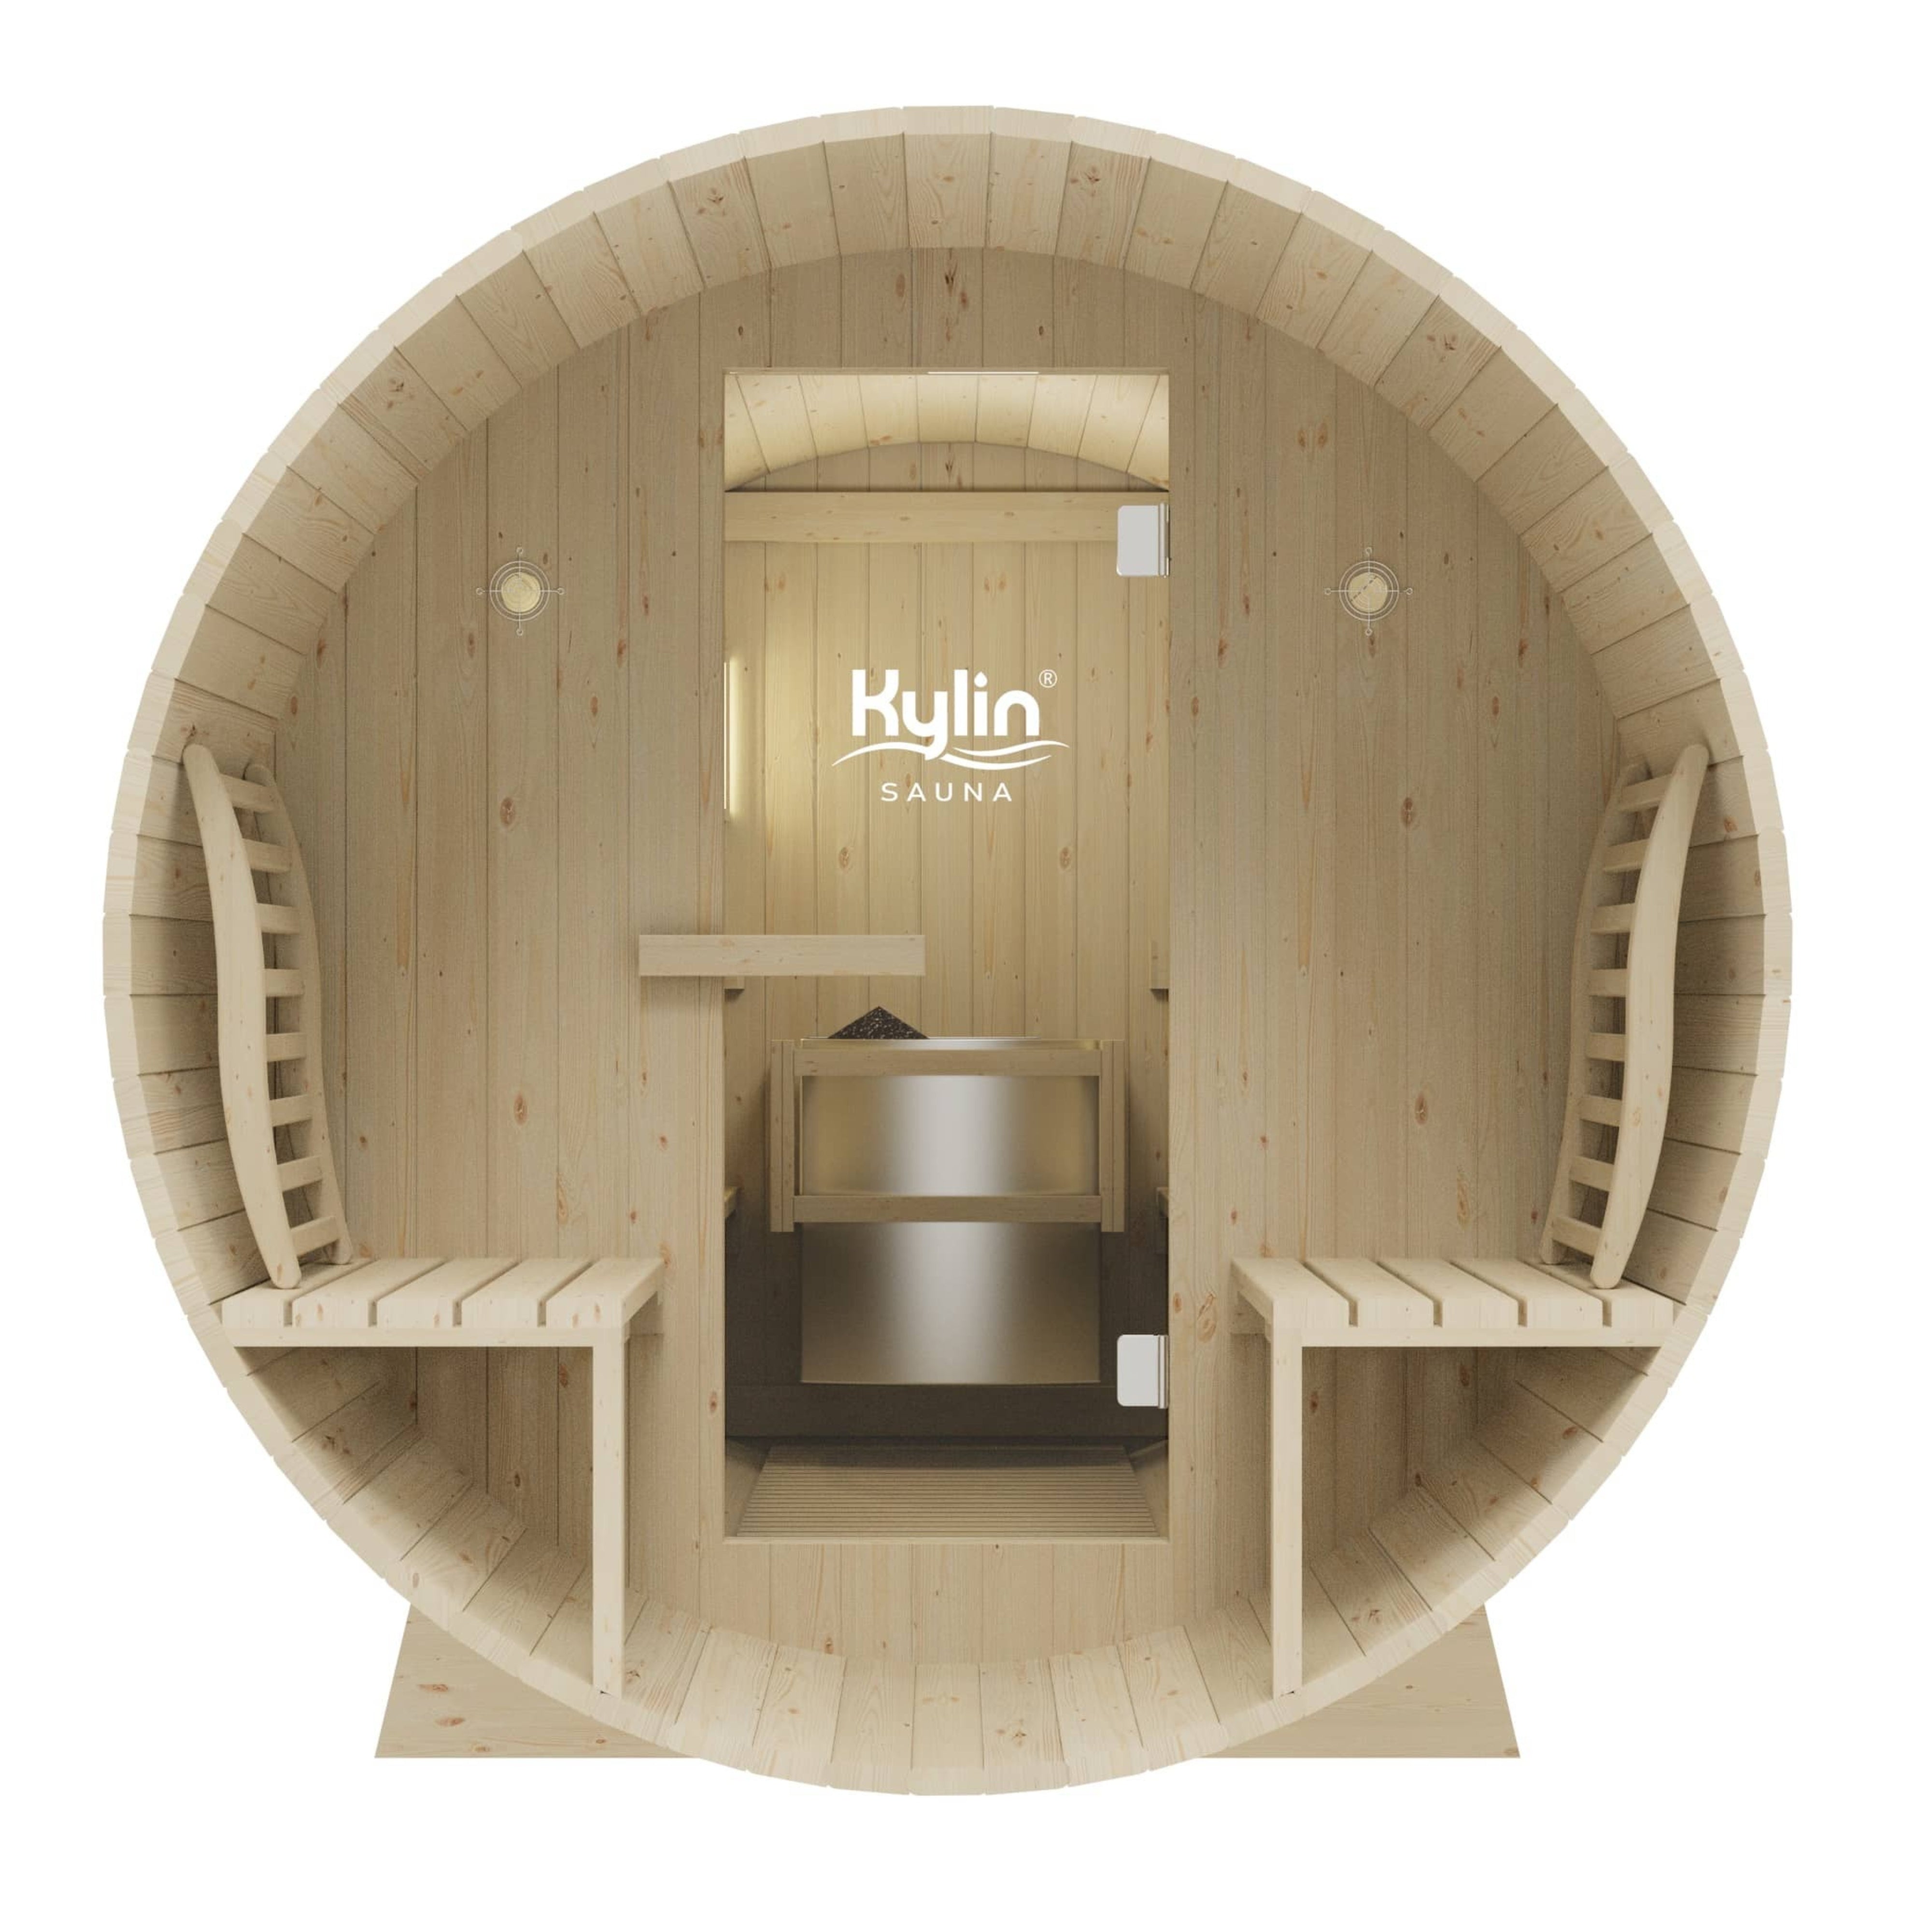 KYLIN 4 PERSON OUTDOOR BARREL SAUNA WITH COVERED PORCH